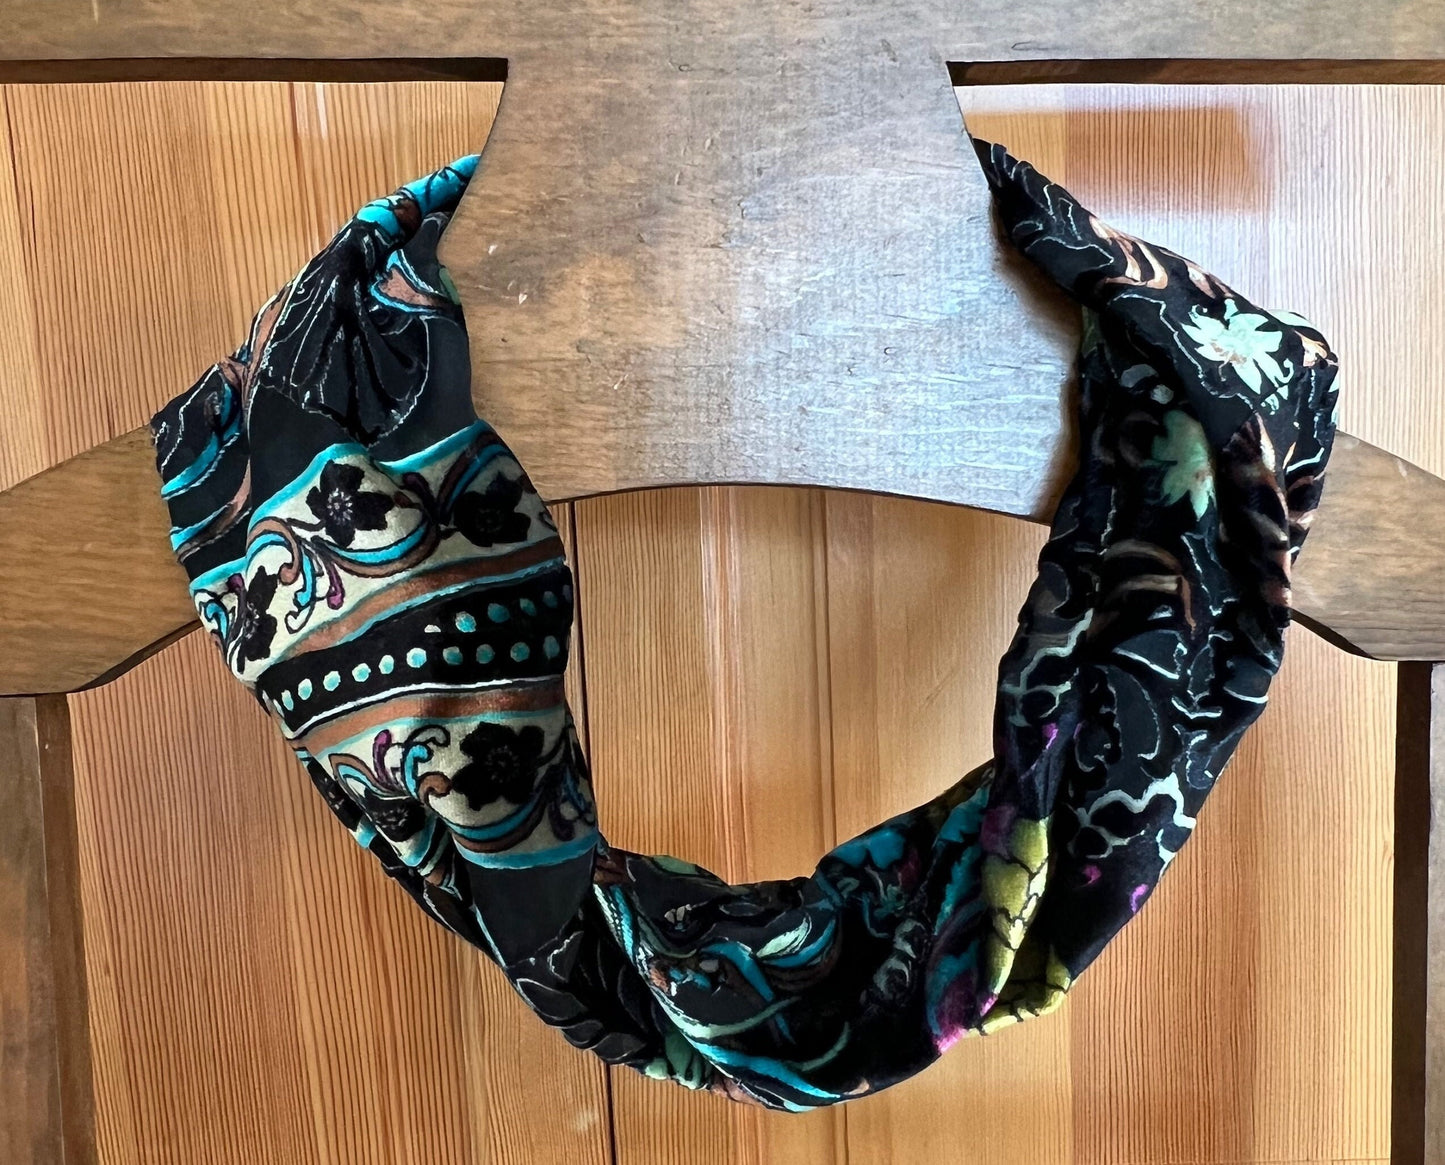 Exquisite pure silk and rayon velvet cowl. Single wrap for comfort, and beauty on your neck.